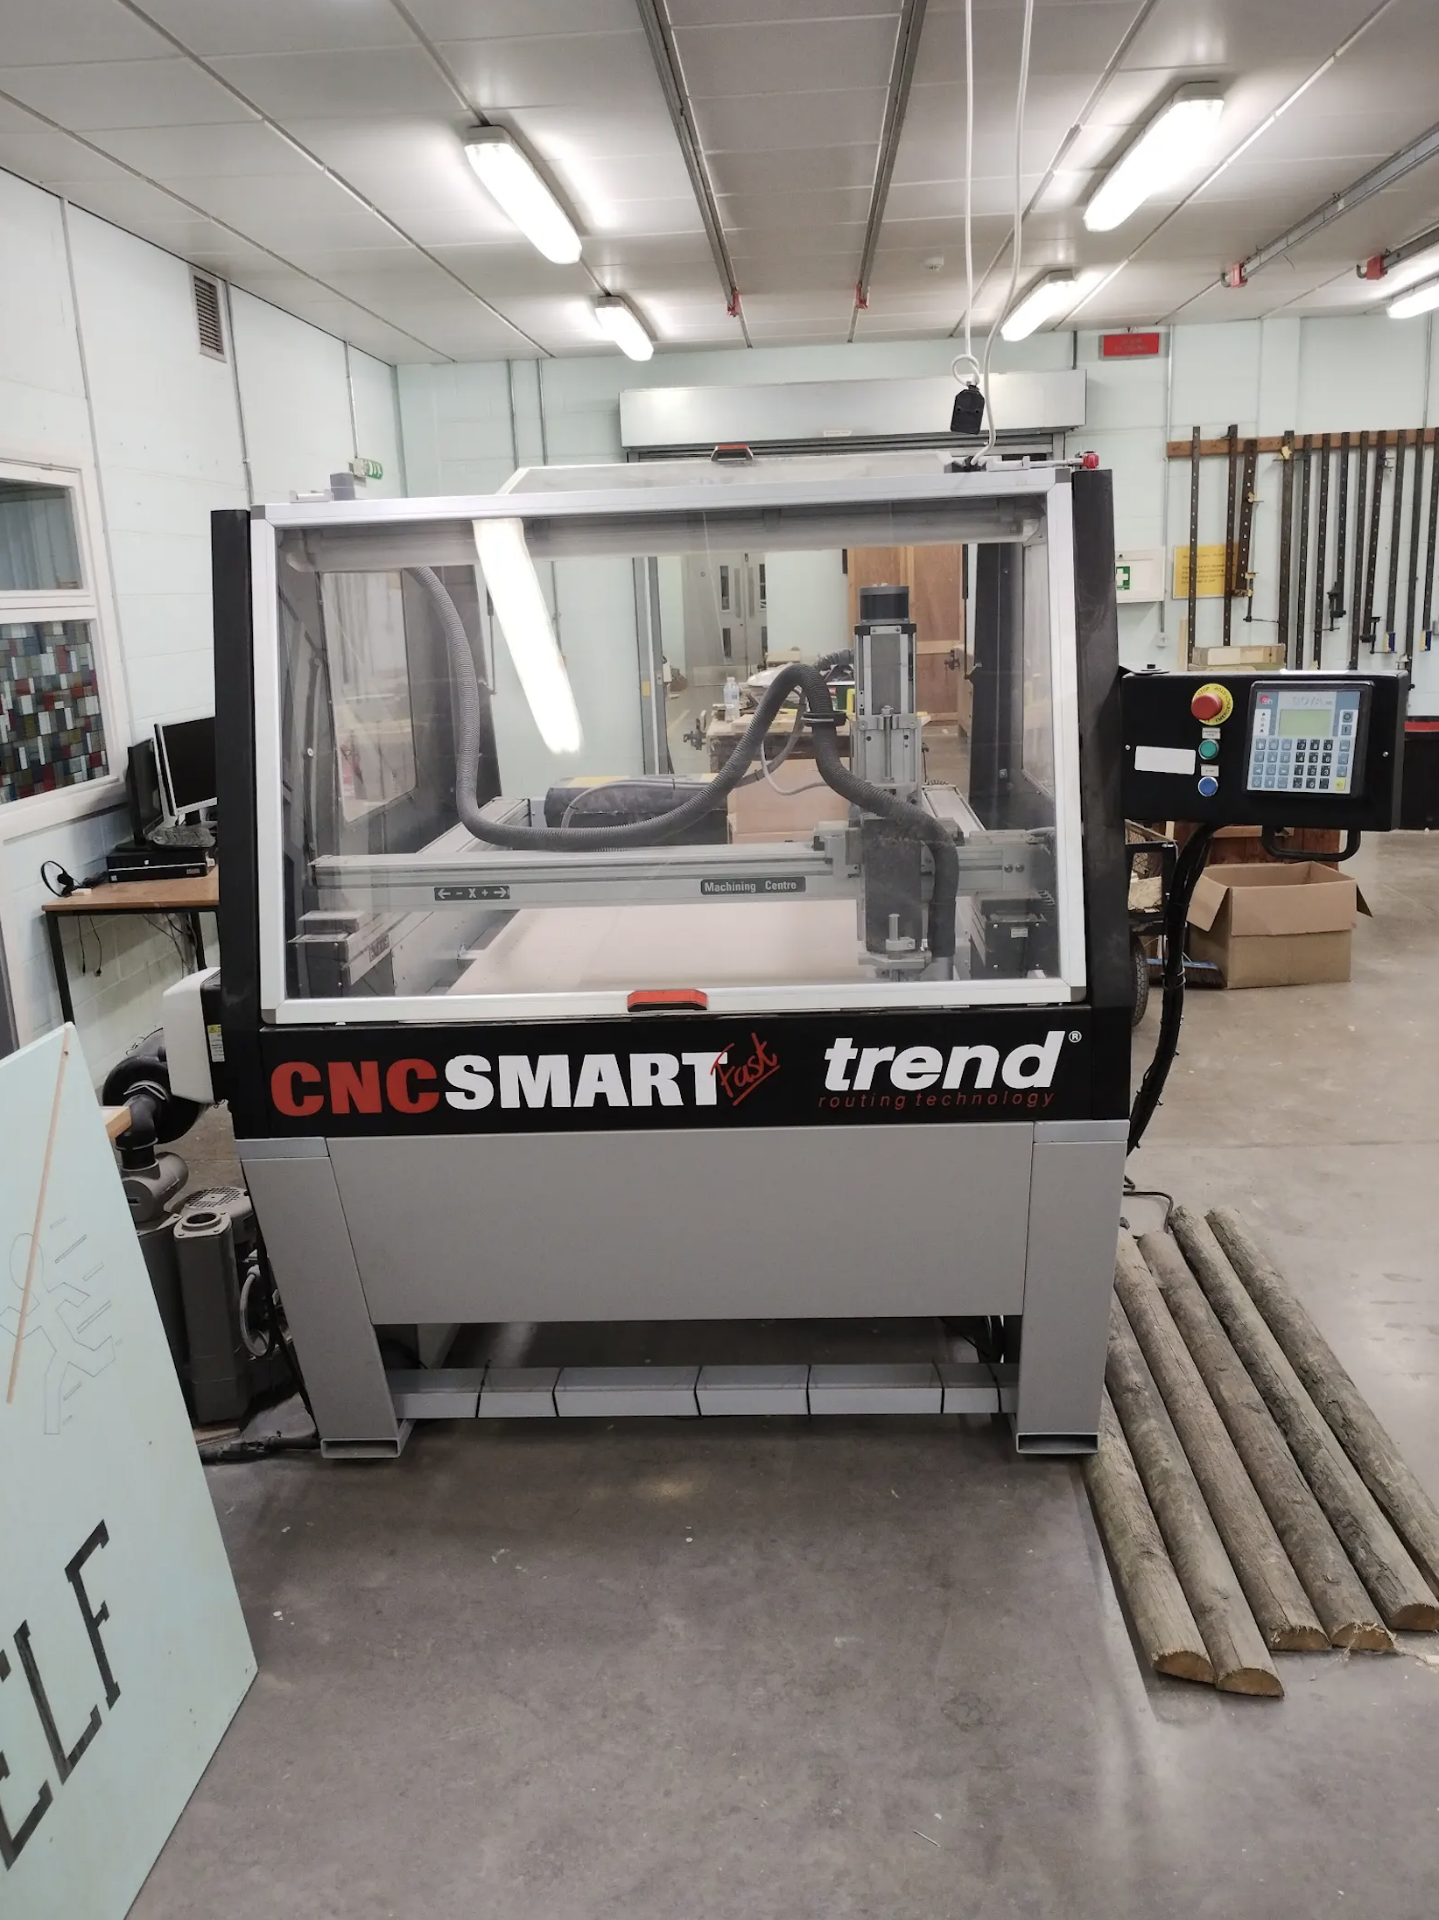 Trend Smartfast CNC Carpentry Router (Approx. 6 yrs old) Ref: 7045-0317-SK01